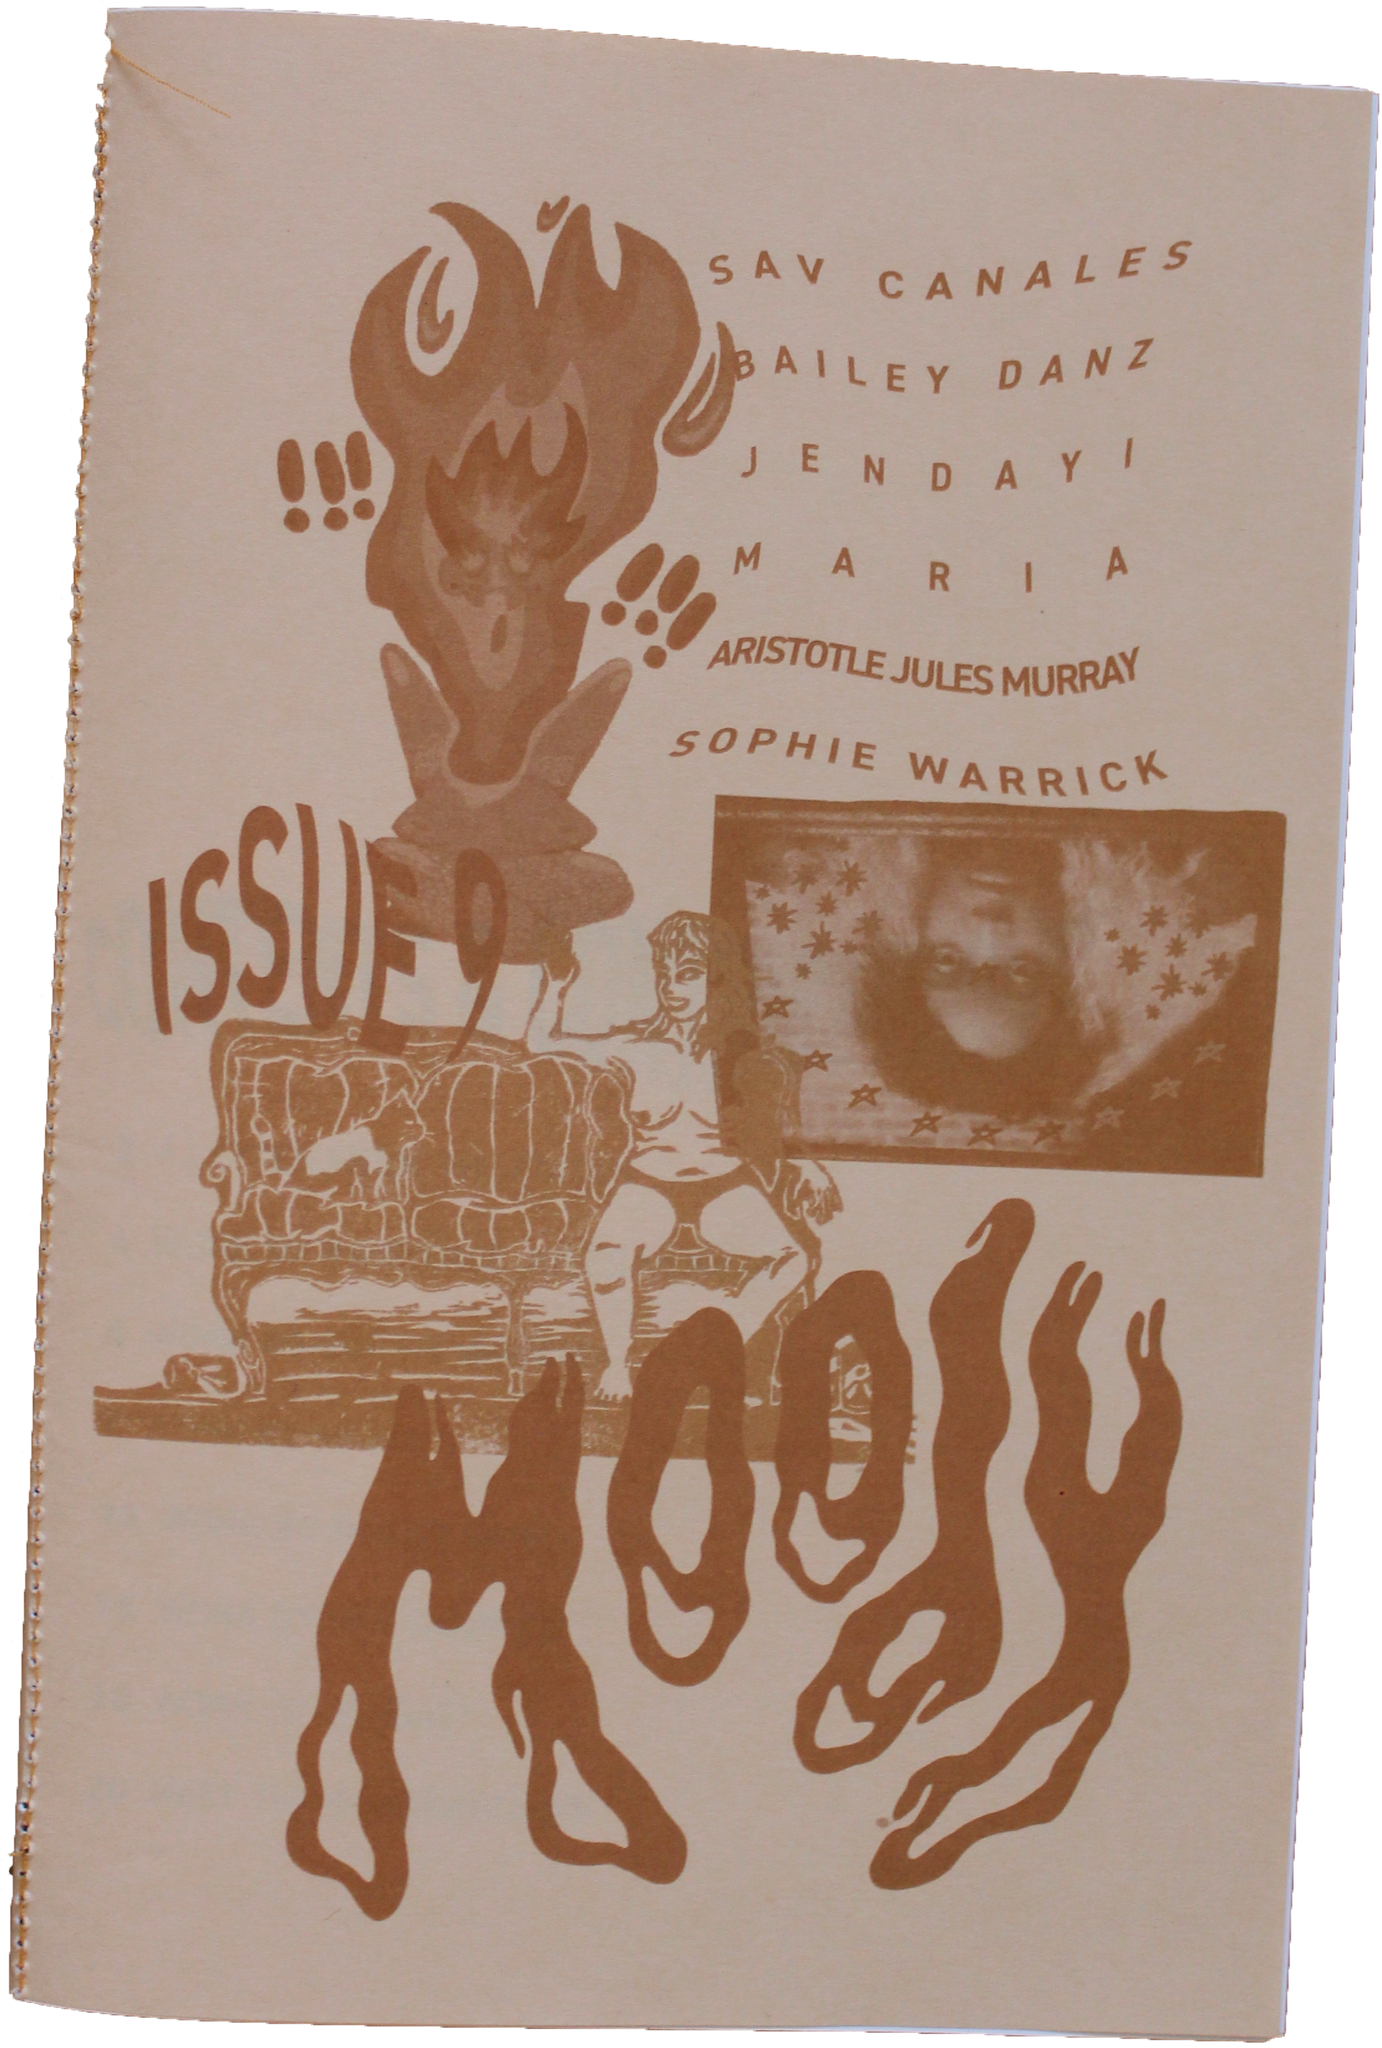 Moody: Issue 9